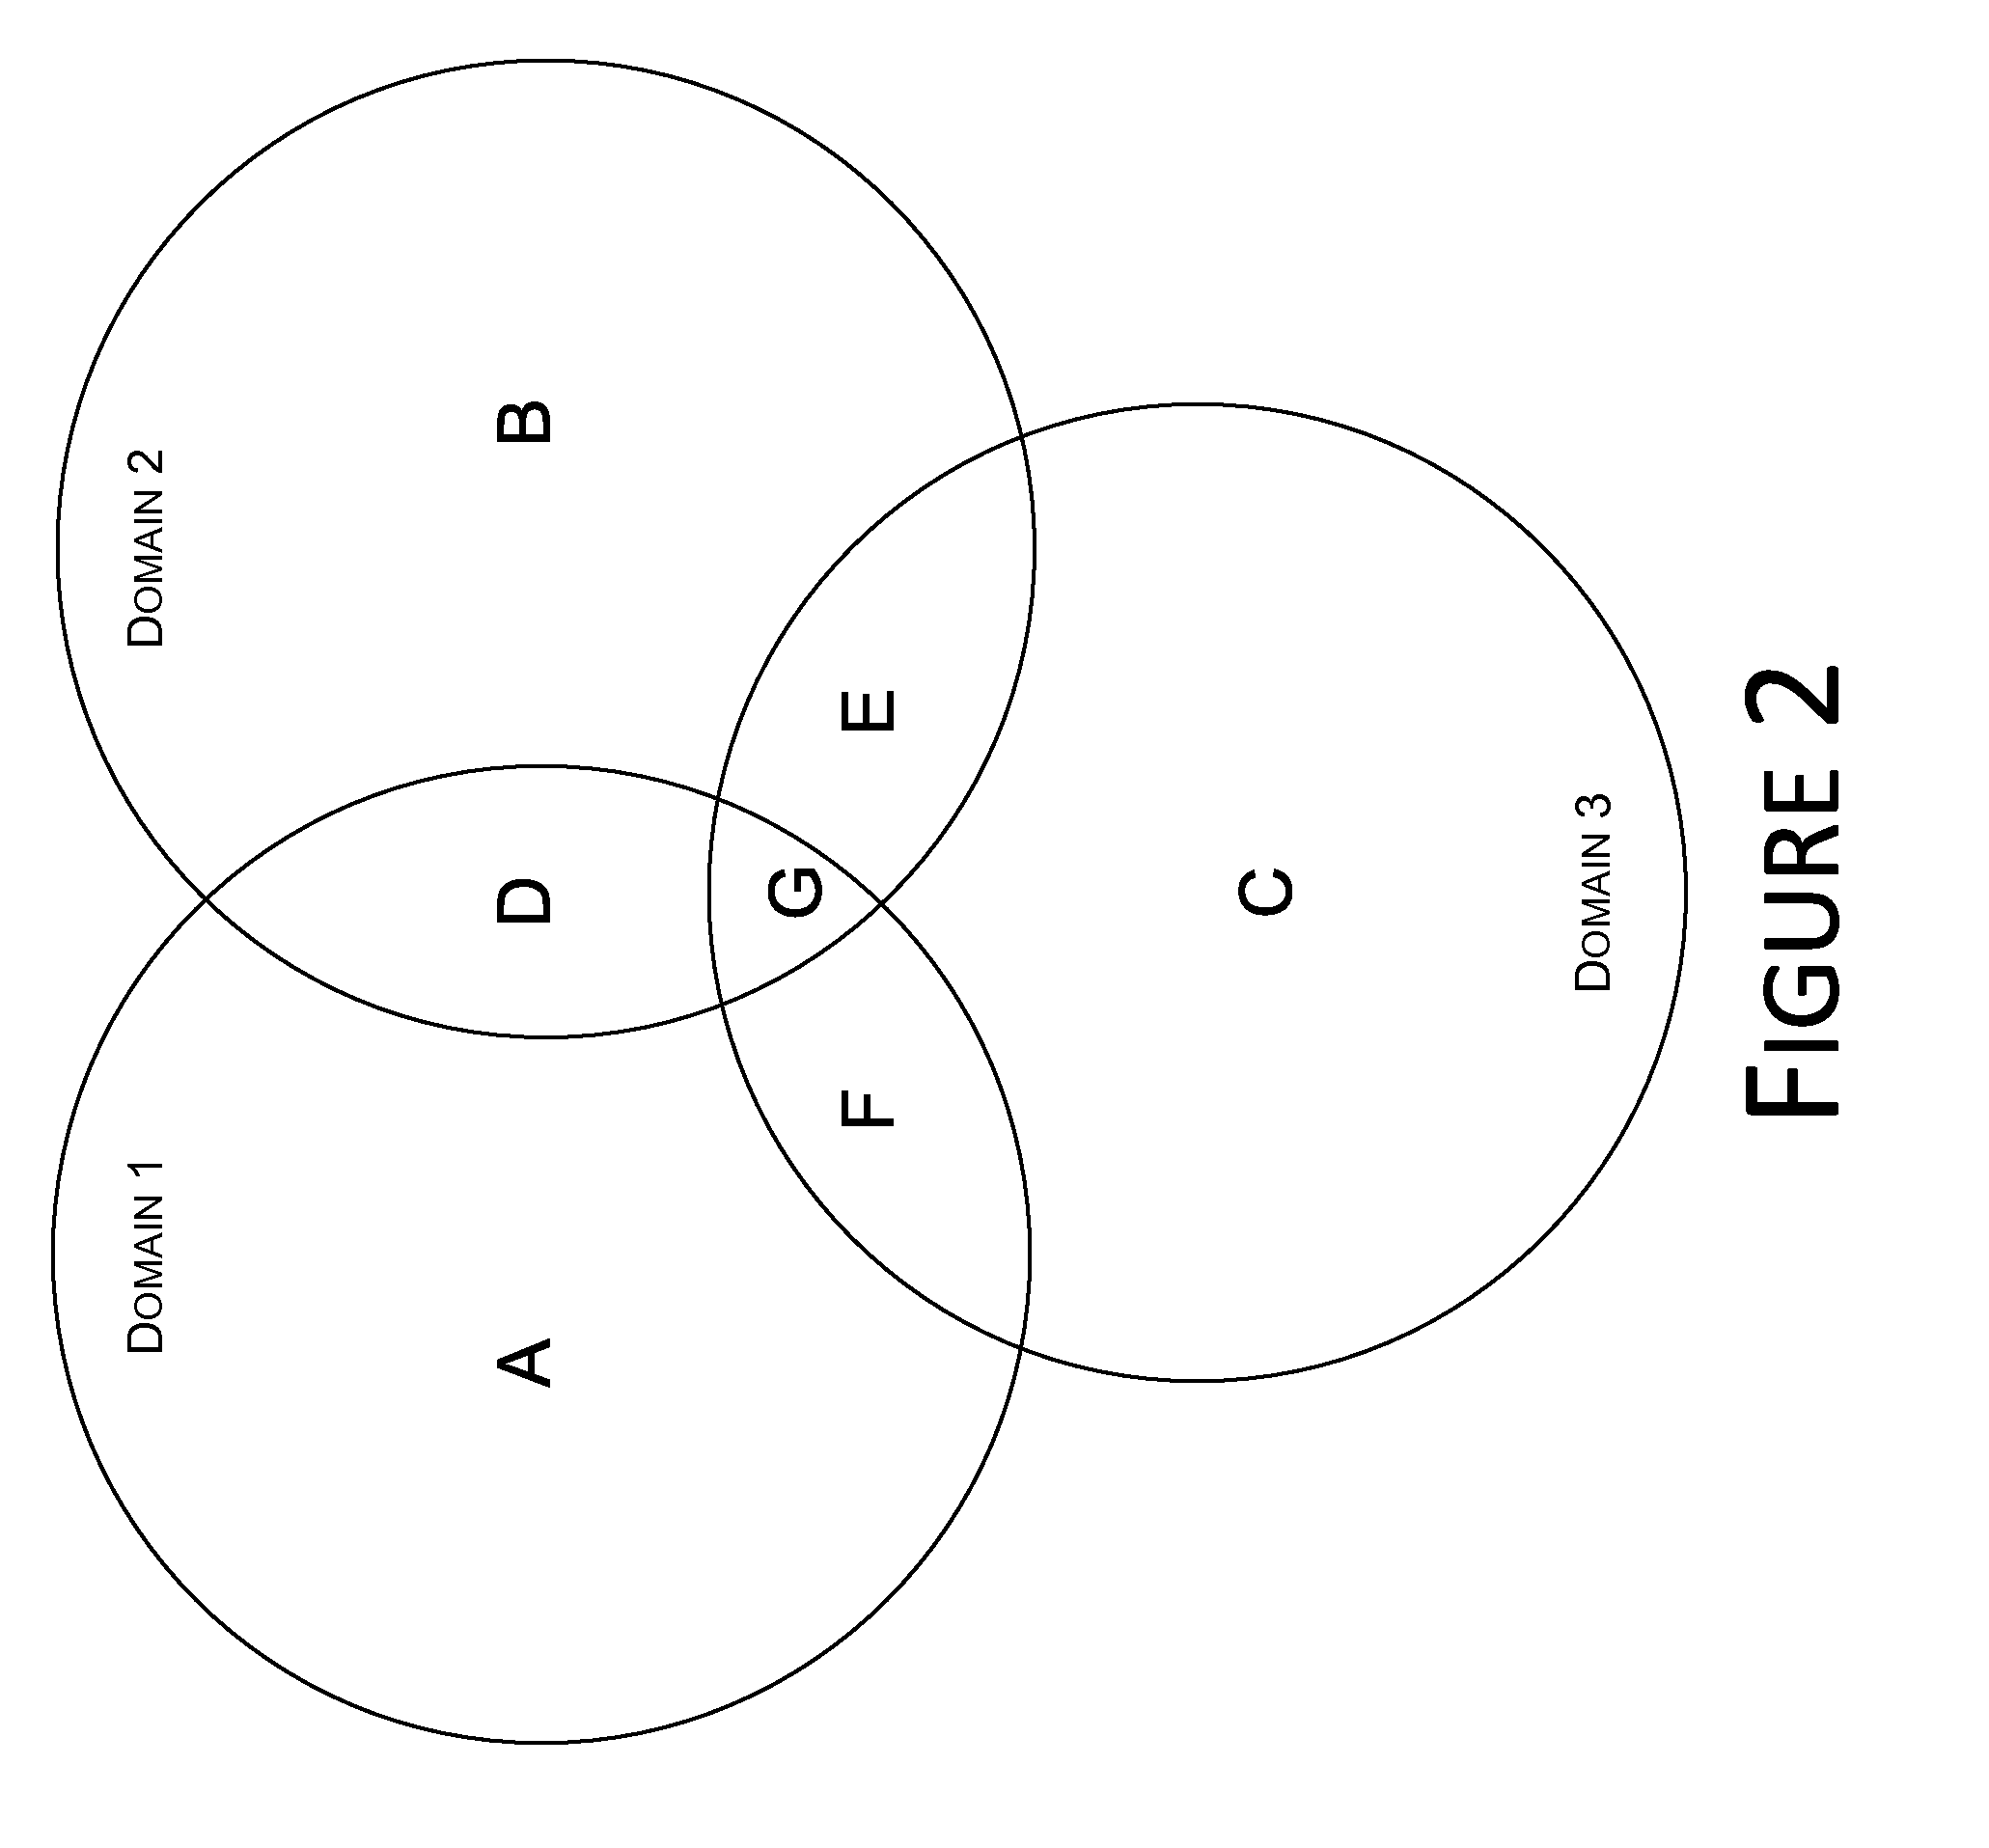 System and method for coordination of neighboring networks on wireline communication channels